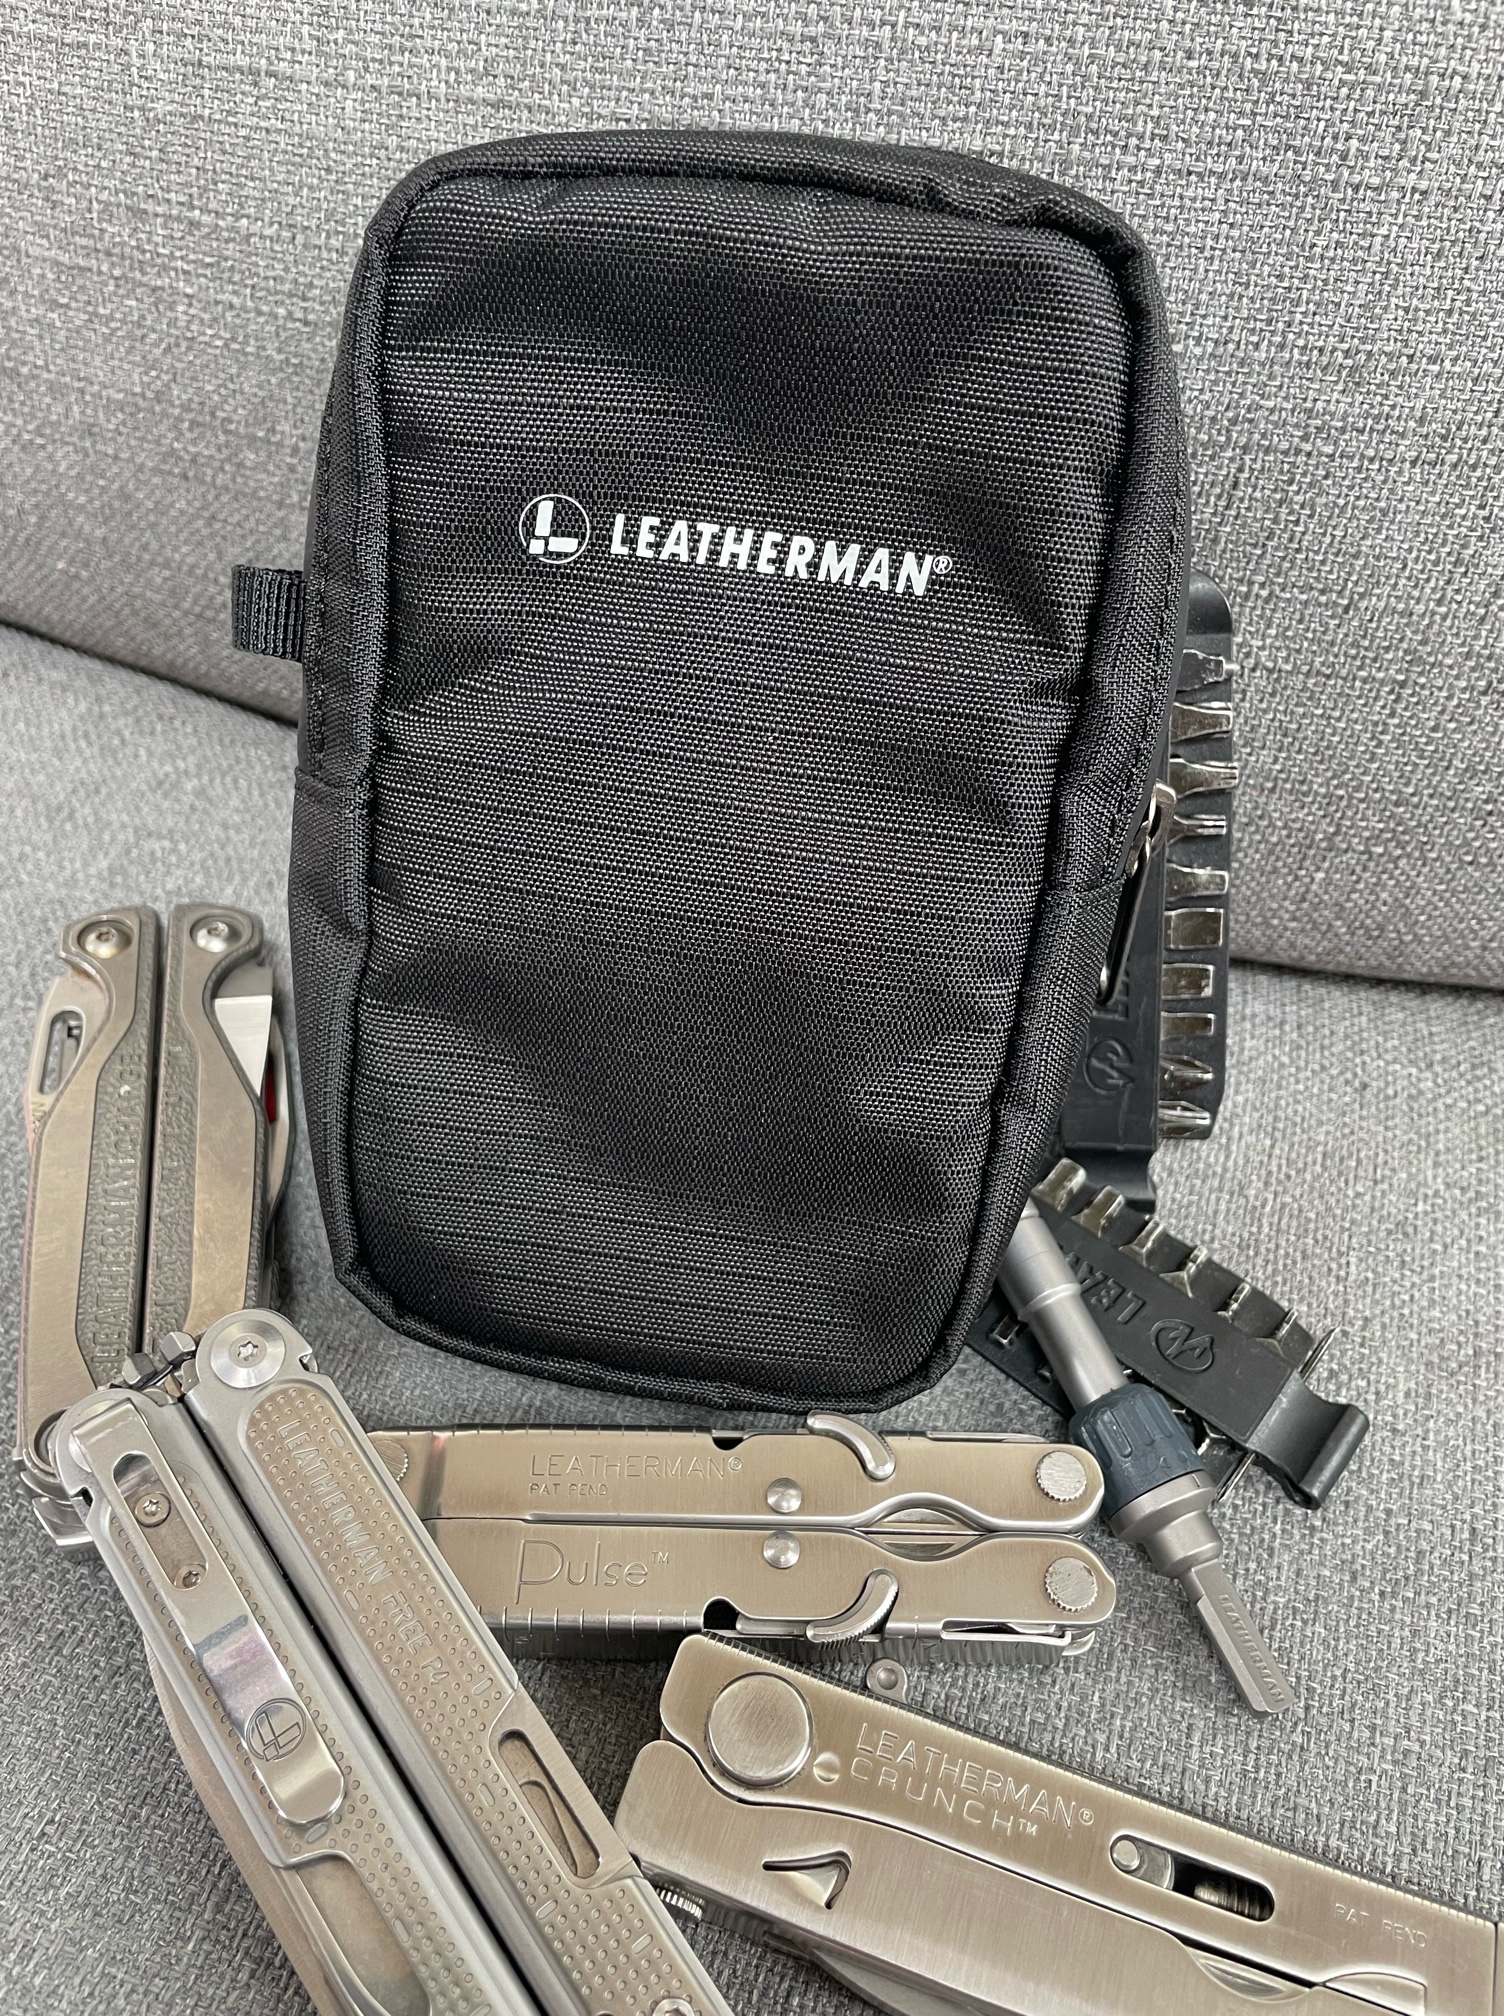 https://the-gadgeteer.com/wp-content/uploads/2022/04/Leatherman-Tool-Pouch-13.jpeg